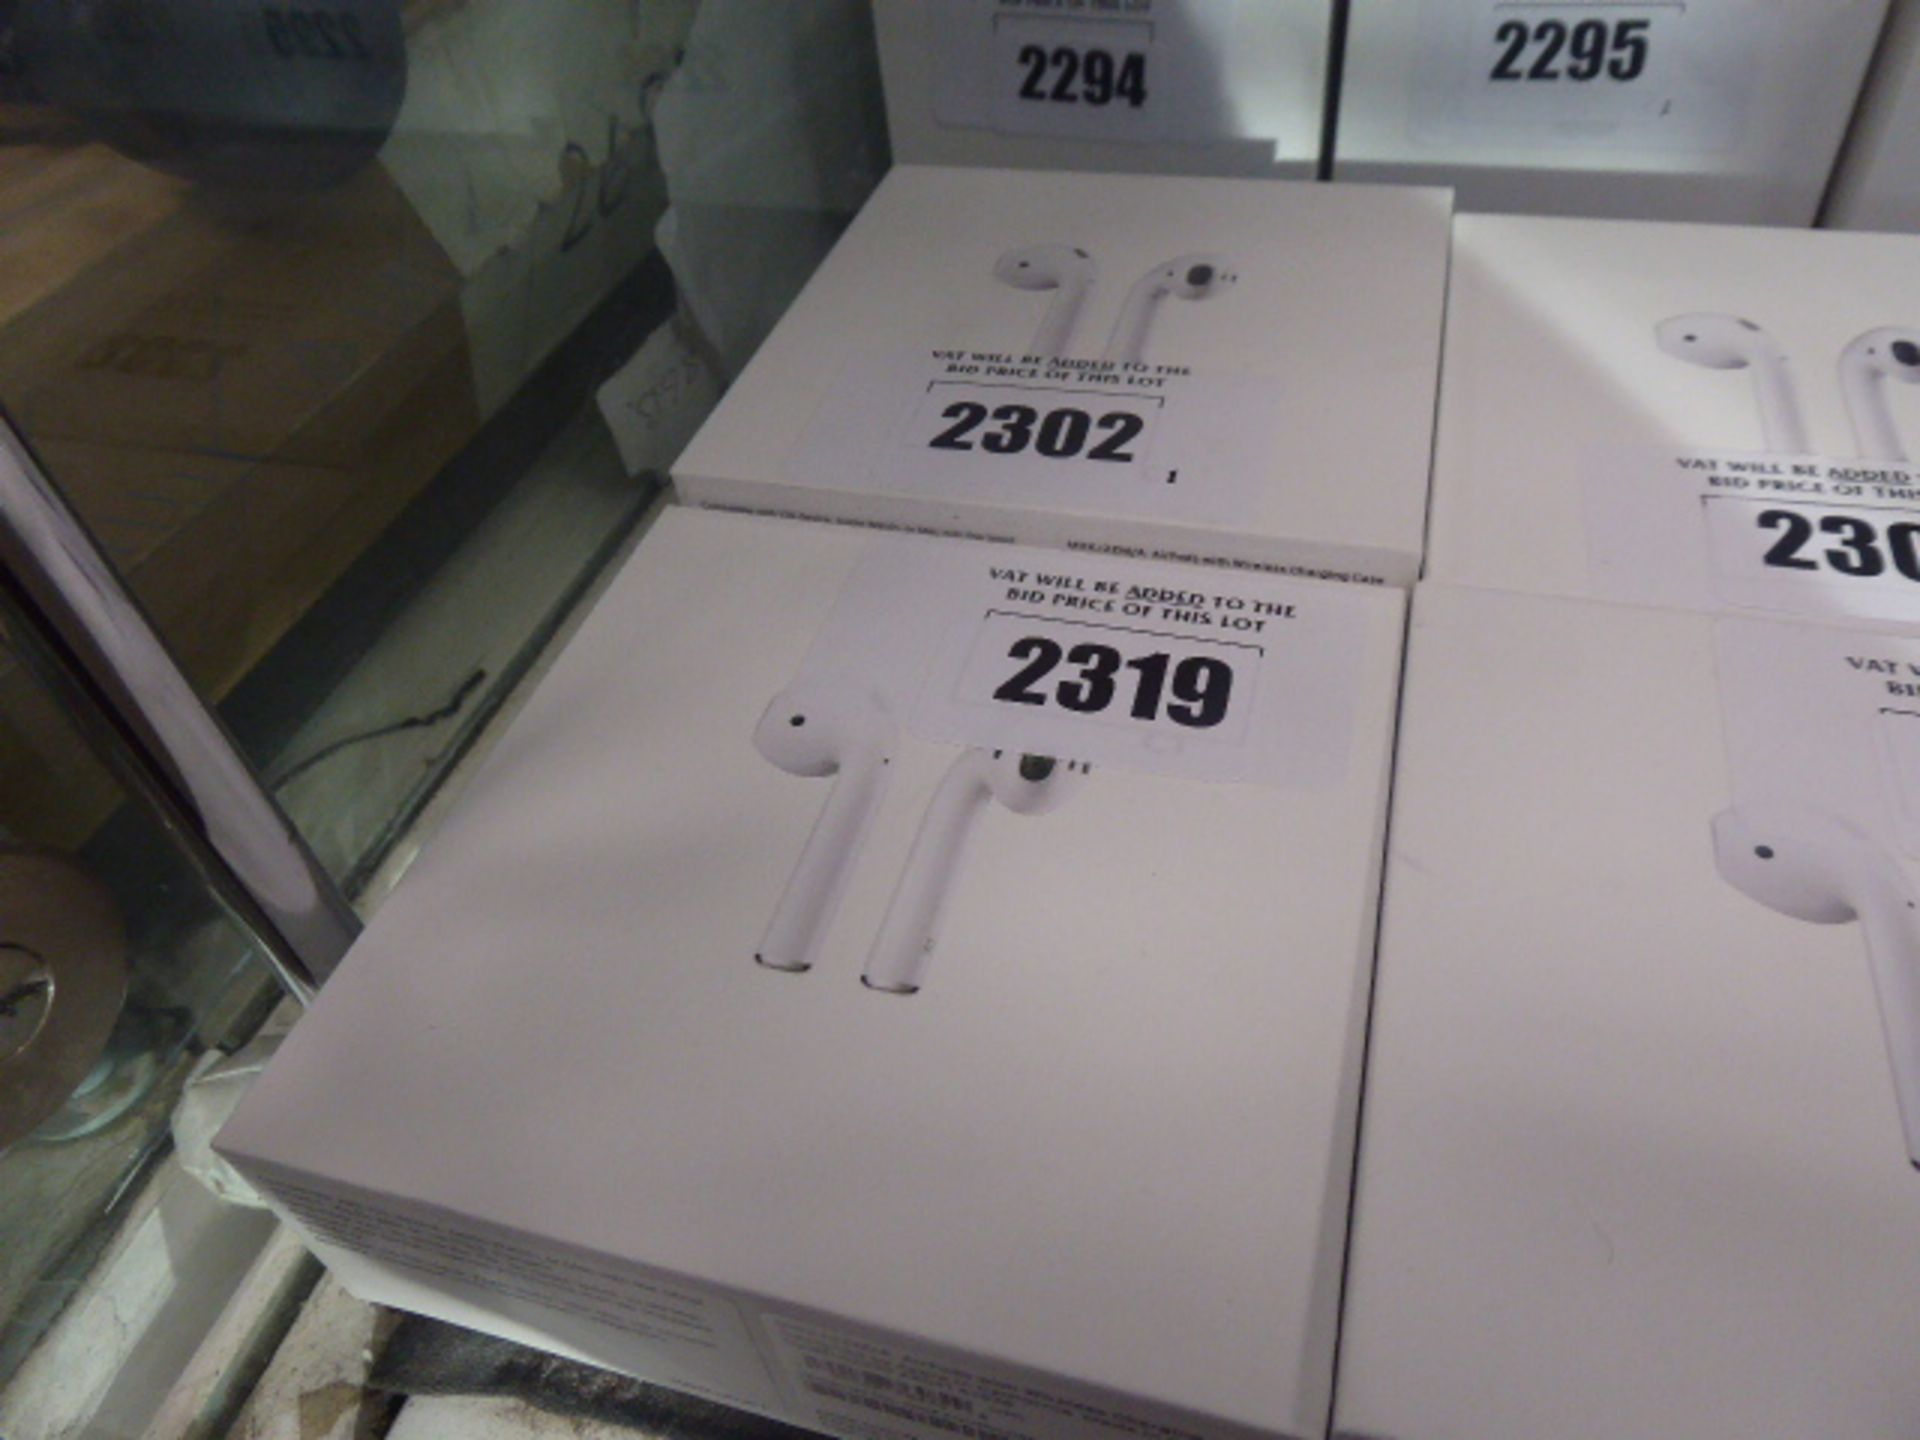 Apple Airpods (2nd gen) with charging case and box